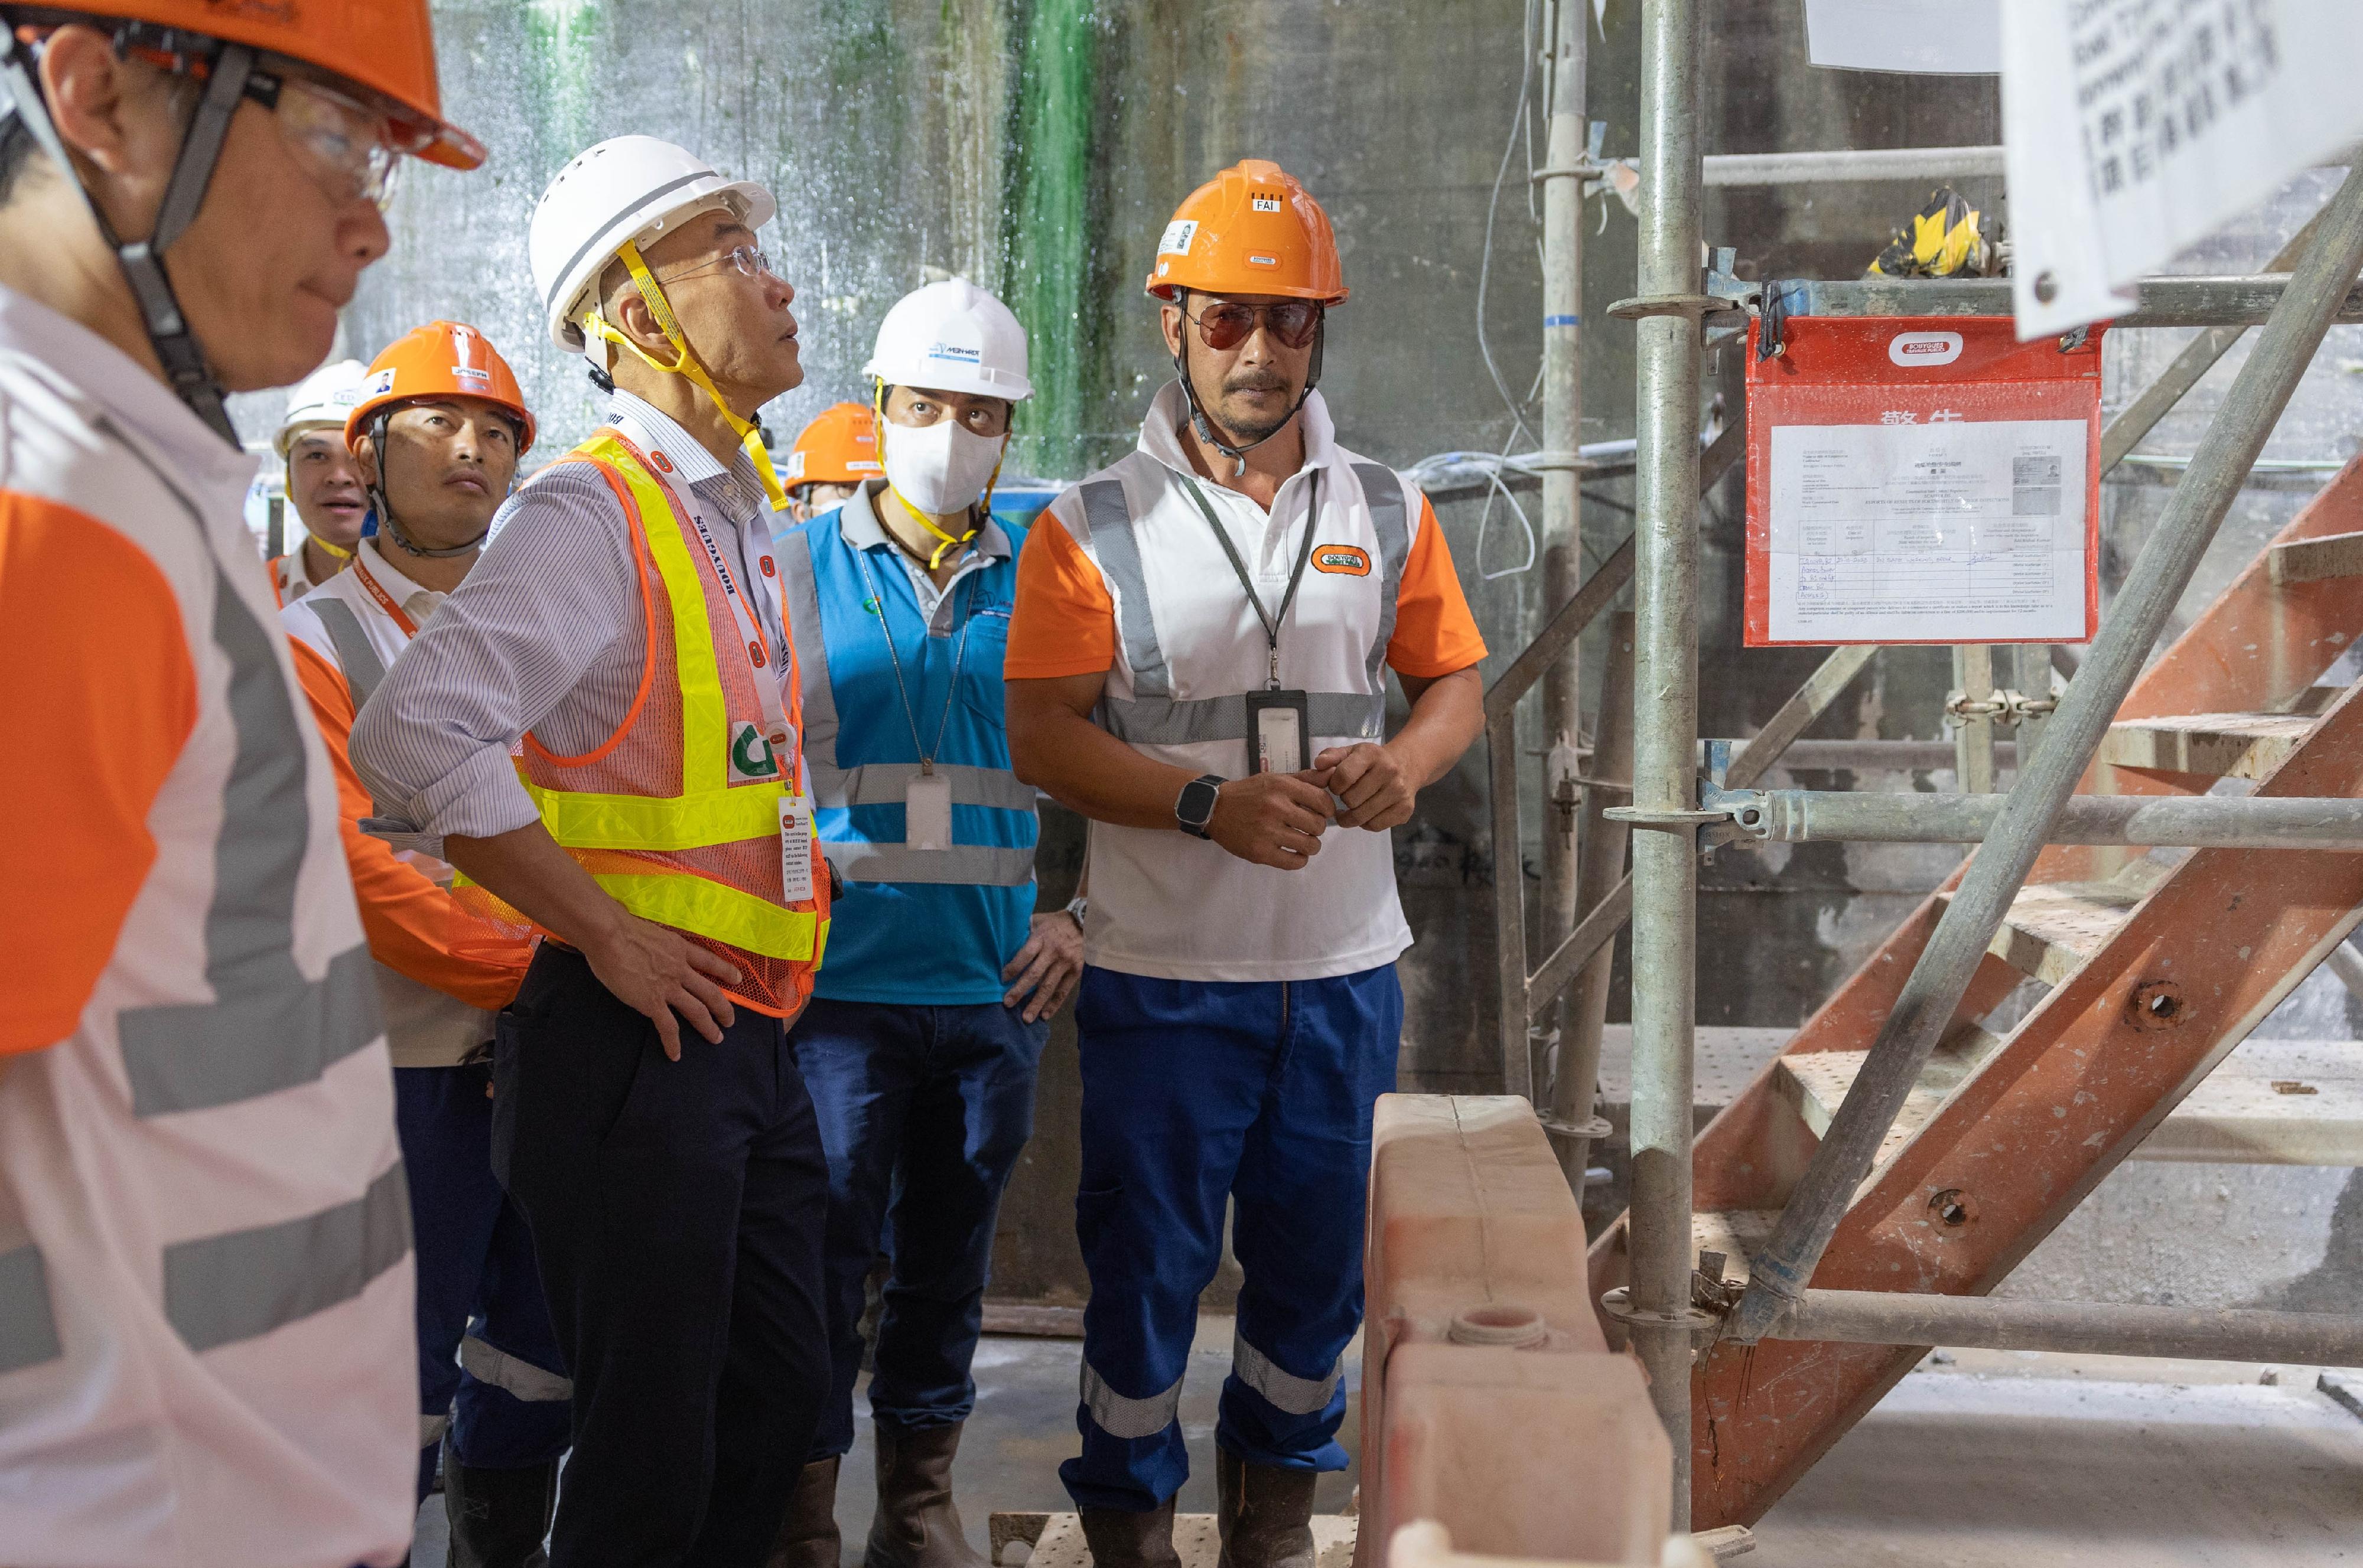 The works departments carried out surprise inspections in the past week, targeting high-risk processes in public works sites, in particular lifting operation and work at height to curb unsafe practices. The Director of Civil Engineering and Development, Mr Michael Fong (second left), was inspecting a site of the public works under his charge.